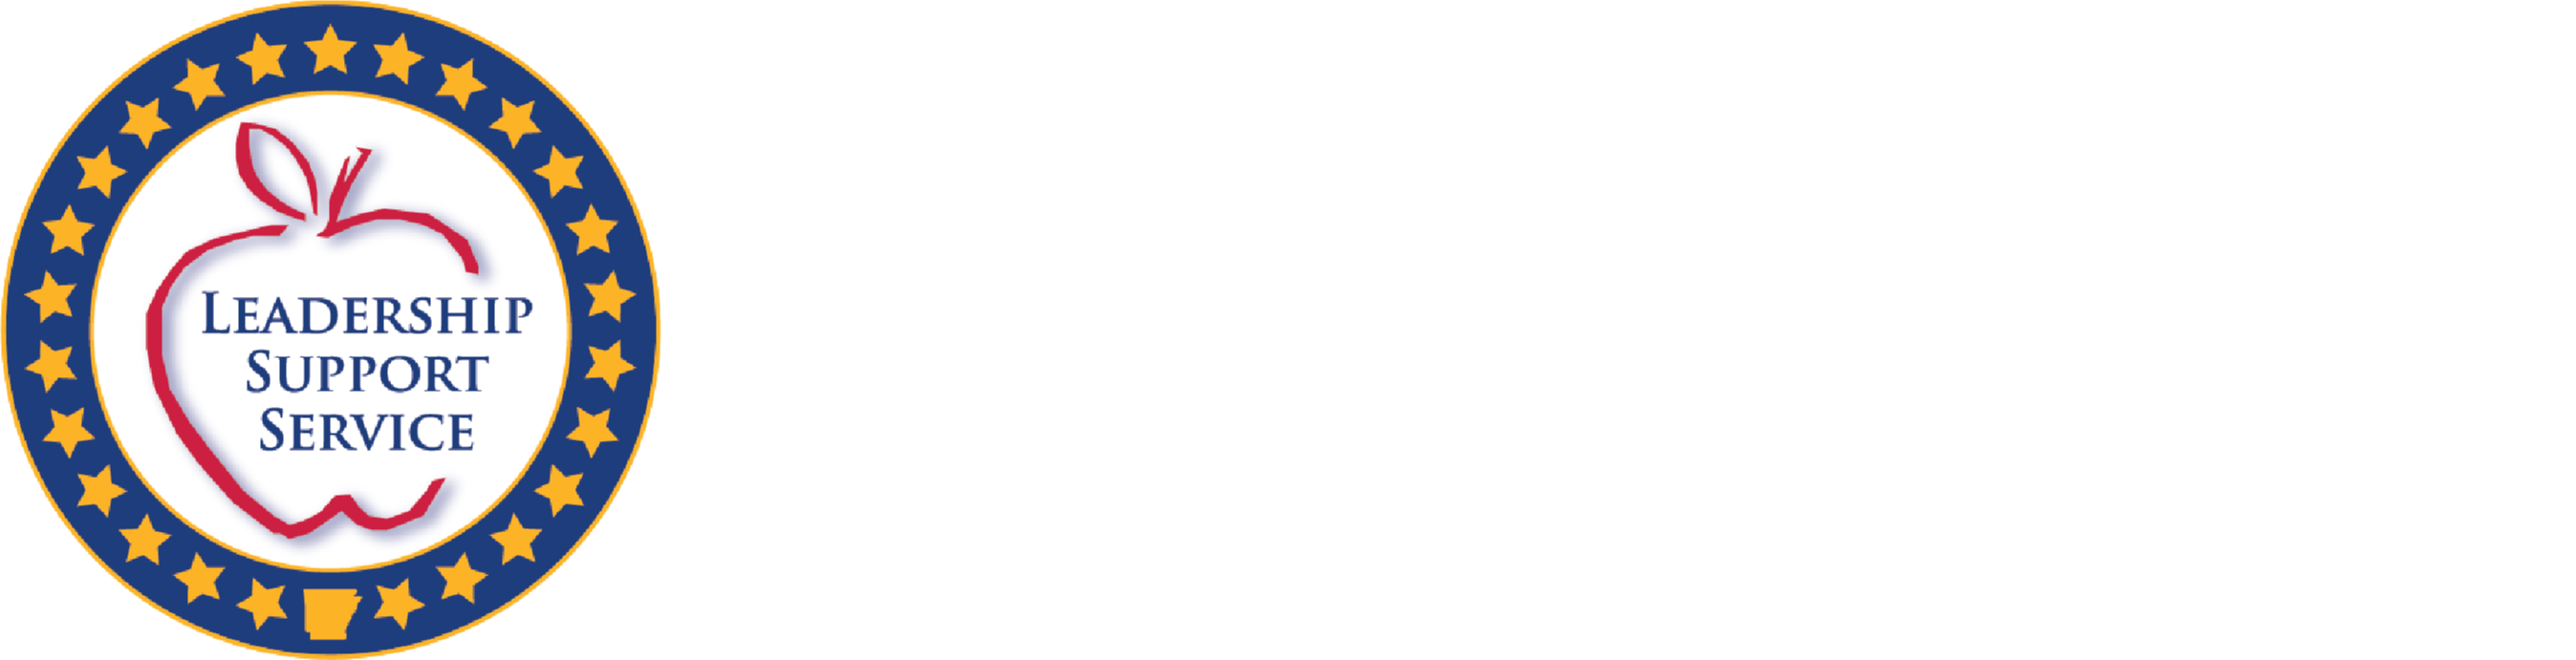 Division of elementary and secondary education: state-required information